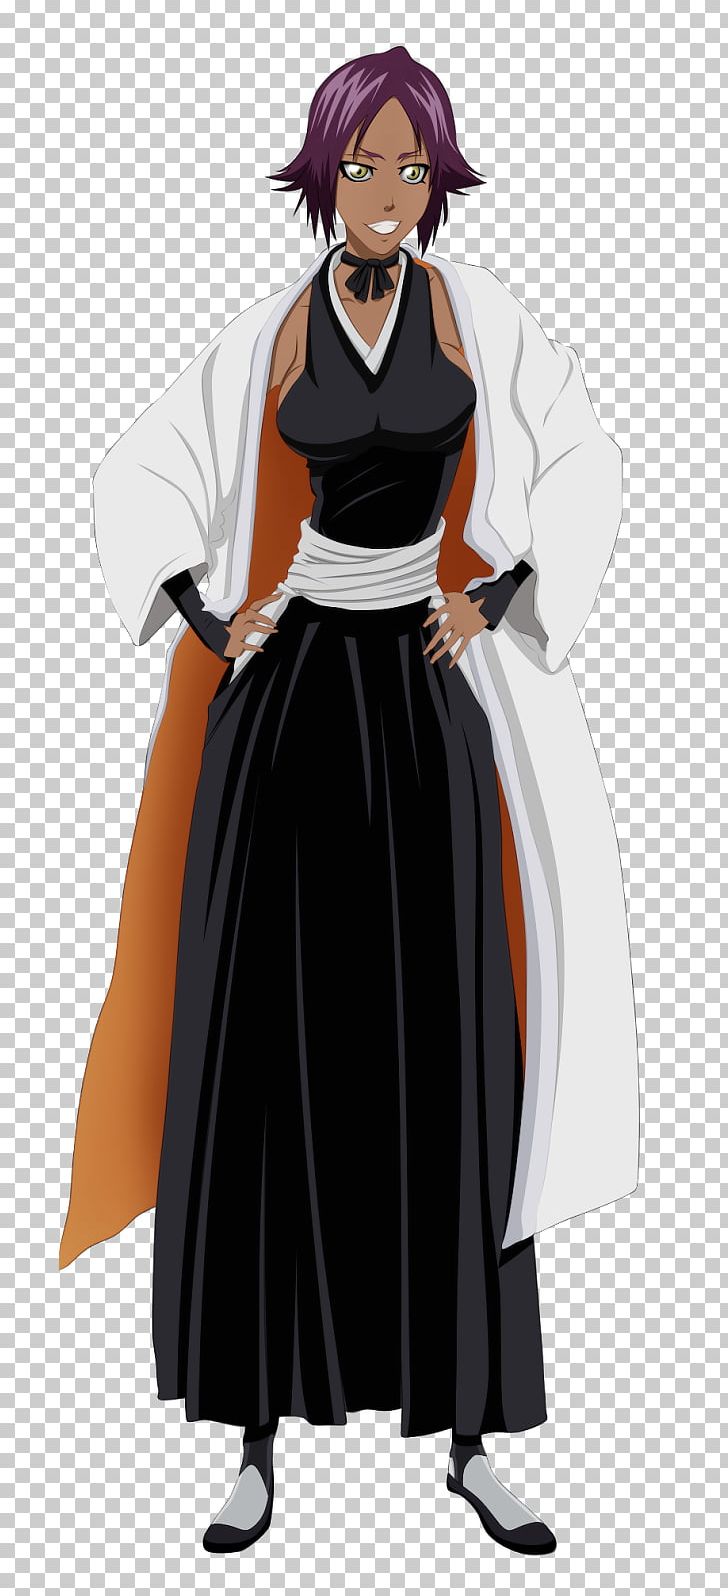 Yoruichi Shihouin Costume Cosplay Shihoin Clan Bleach PNG, Clipart, Anime, Art, Bleach, Character, Clothing Free PNG Download